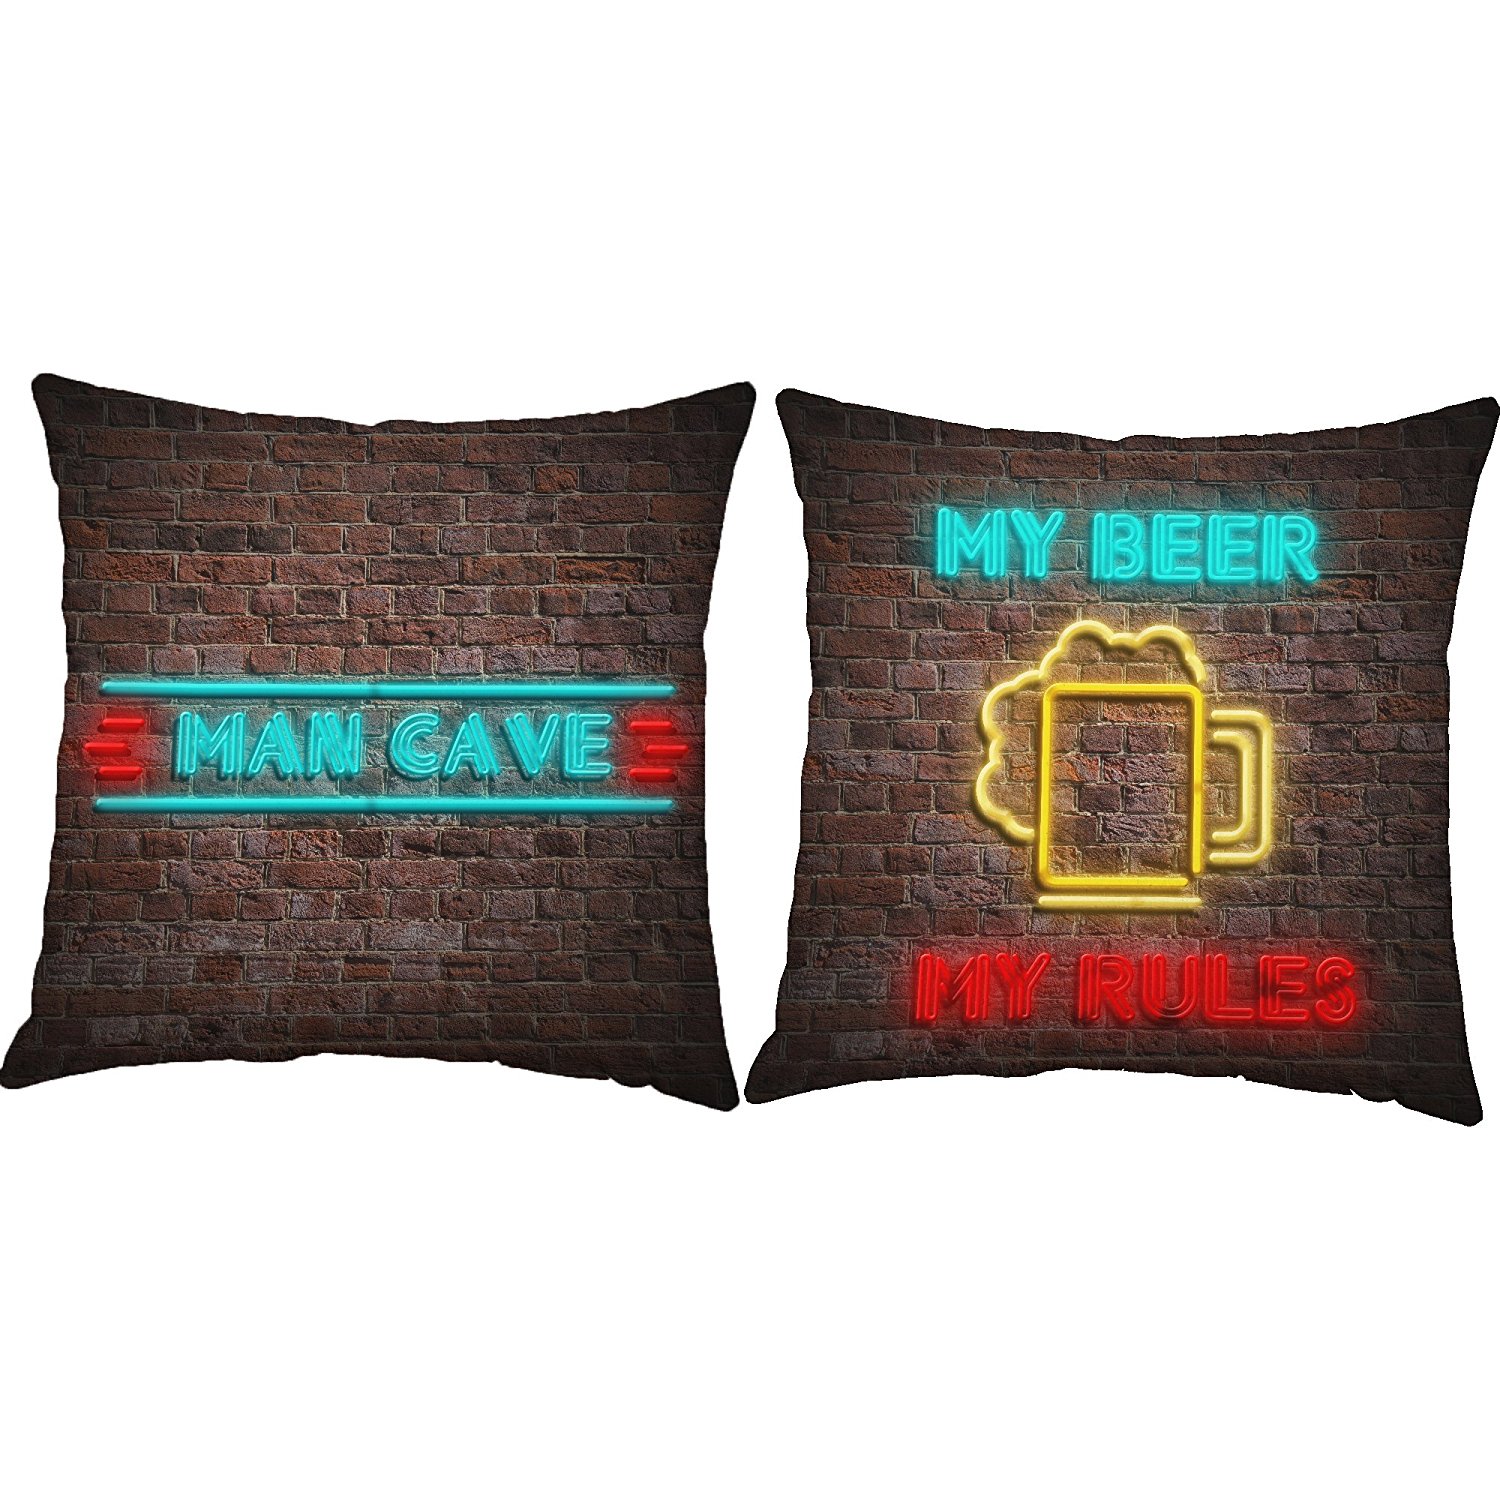 Set Of 2 Man Cave Throw Pillows 14x14 Inch Square White Cotton